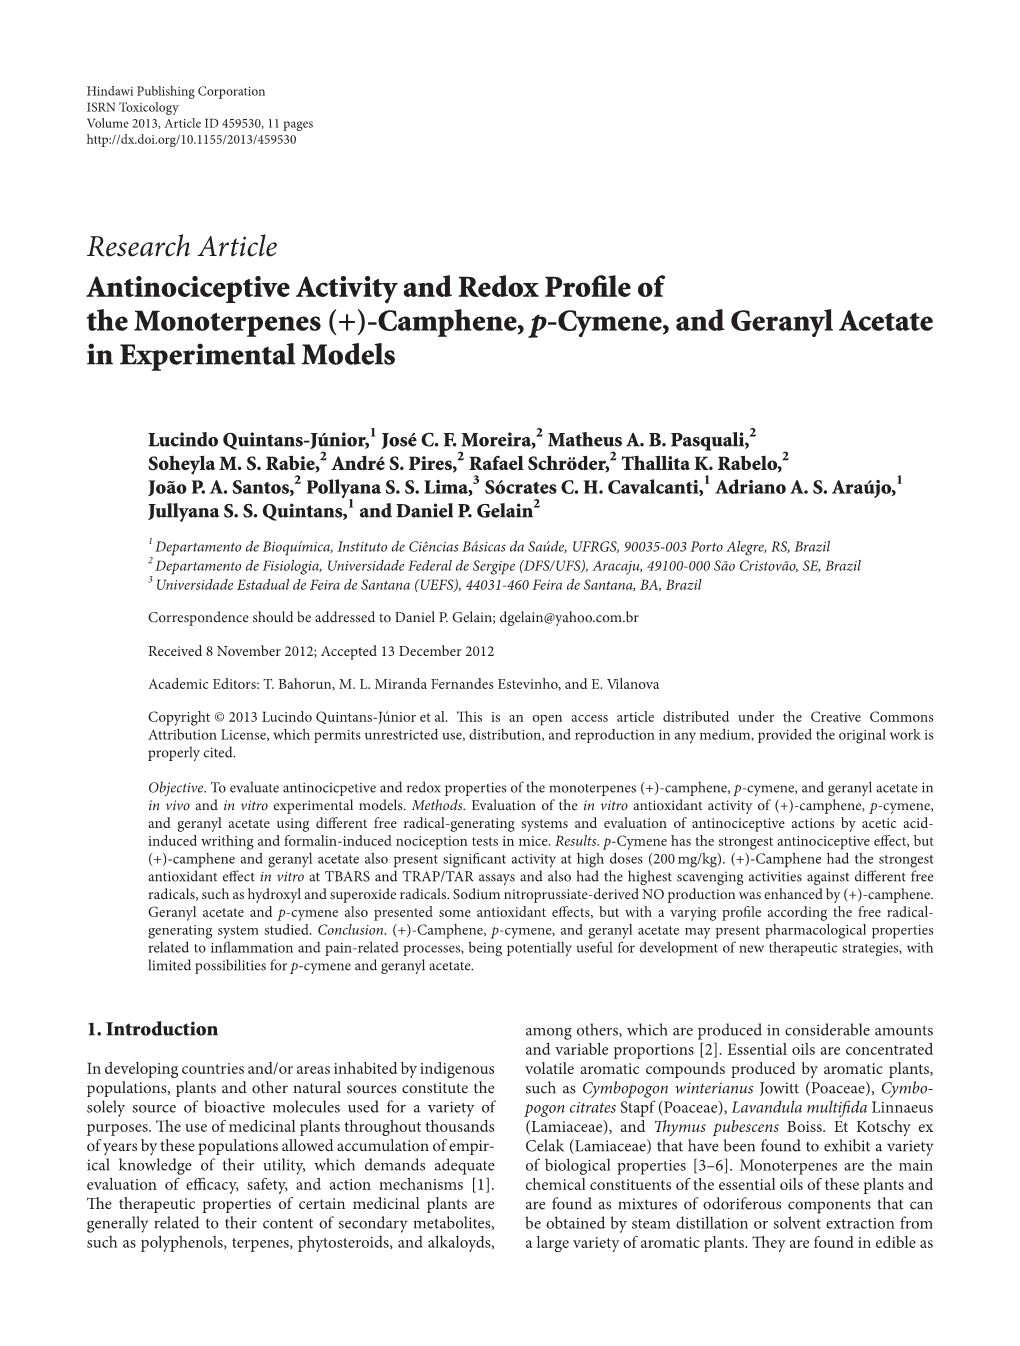 Research Article Antinociceptive Activity and Redox Pro Le of The